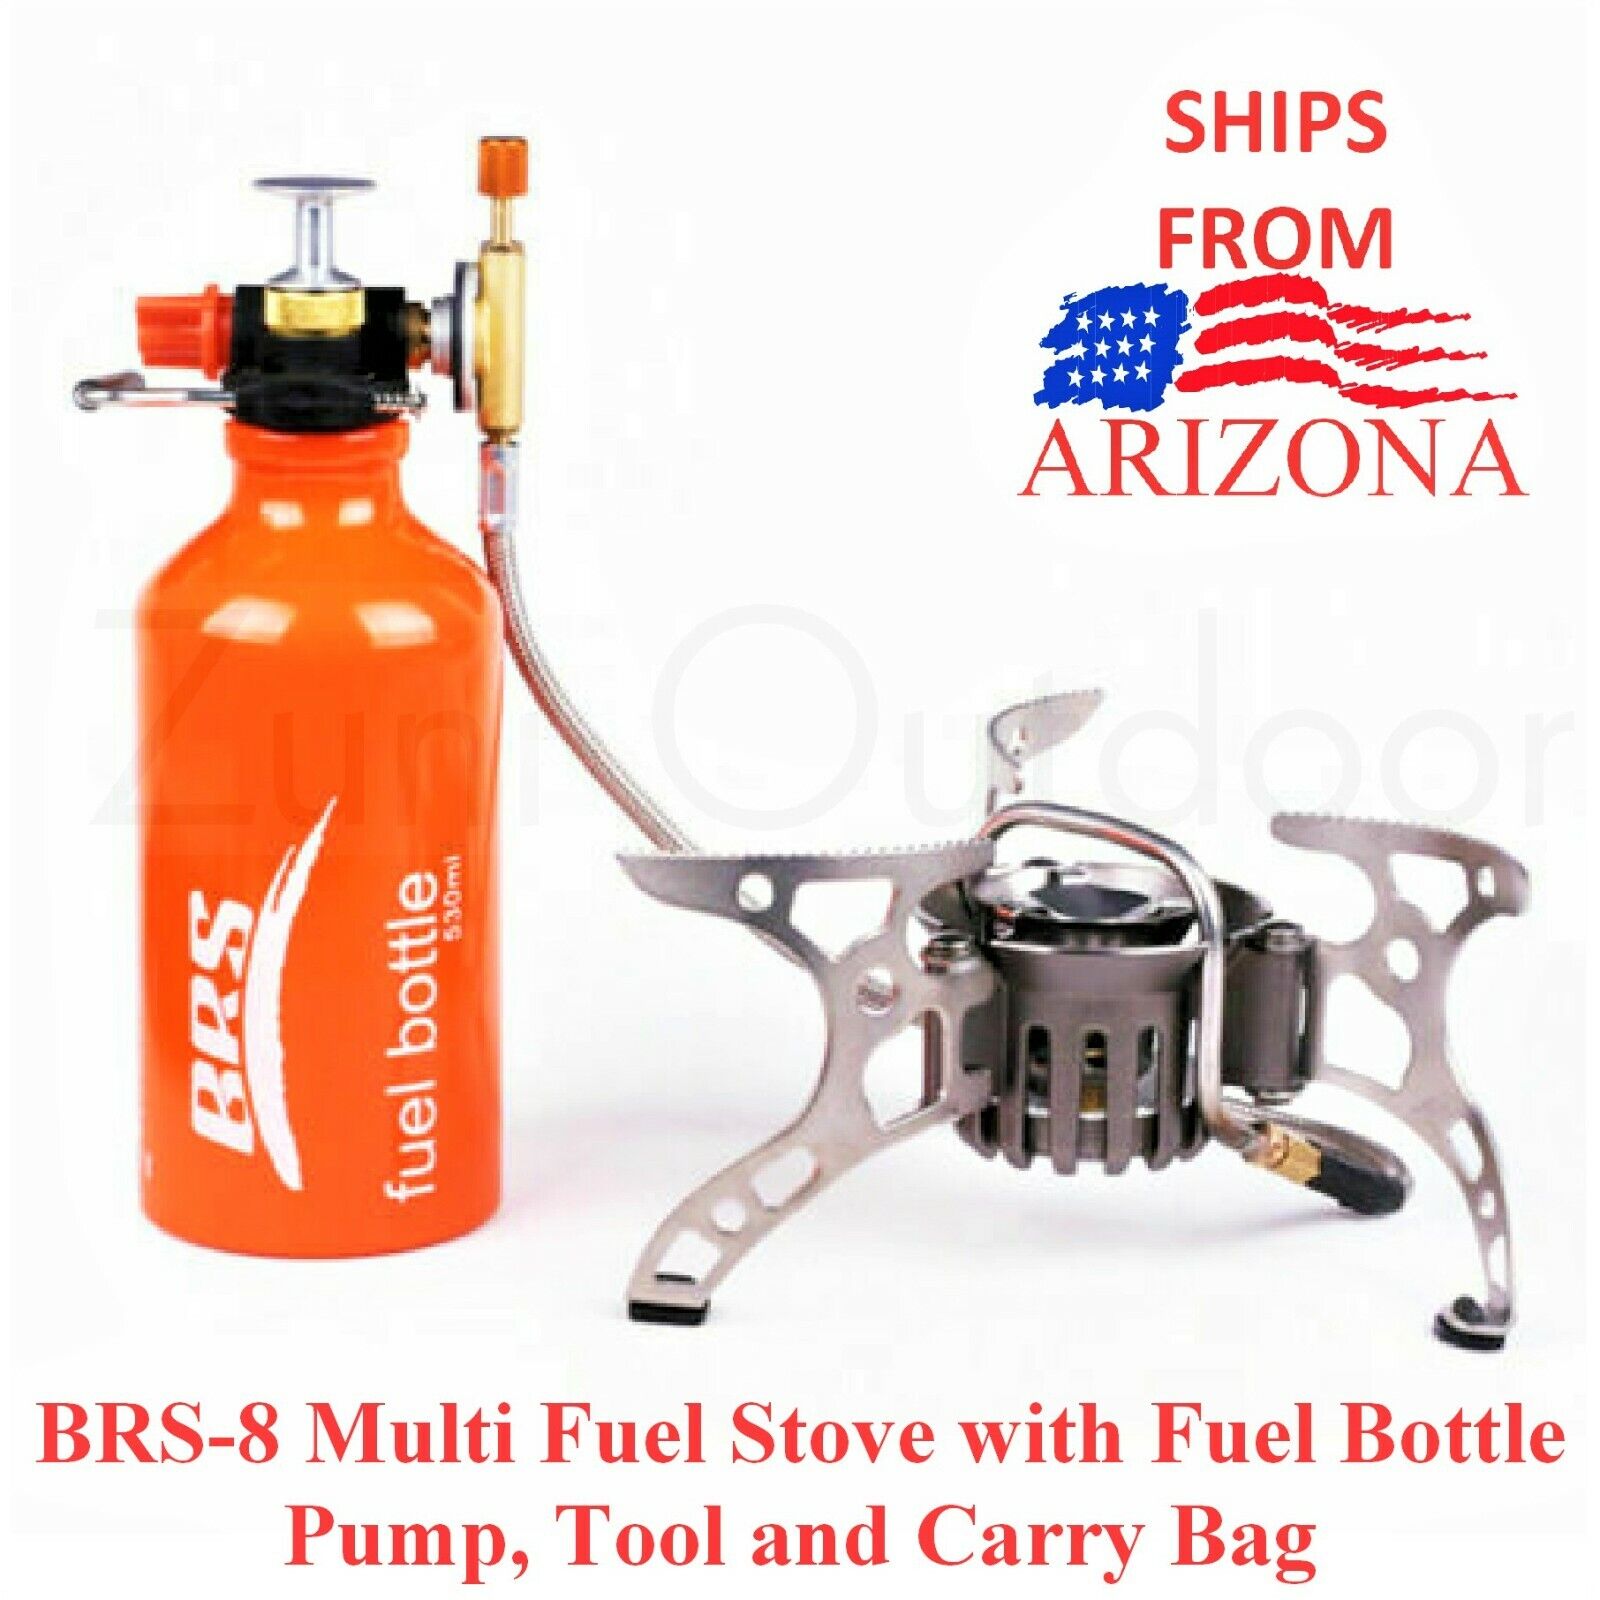 BRS-8 Portable Multi Fuel Gas Folding Camping Stove and Bott